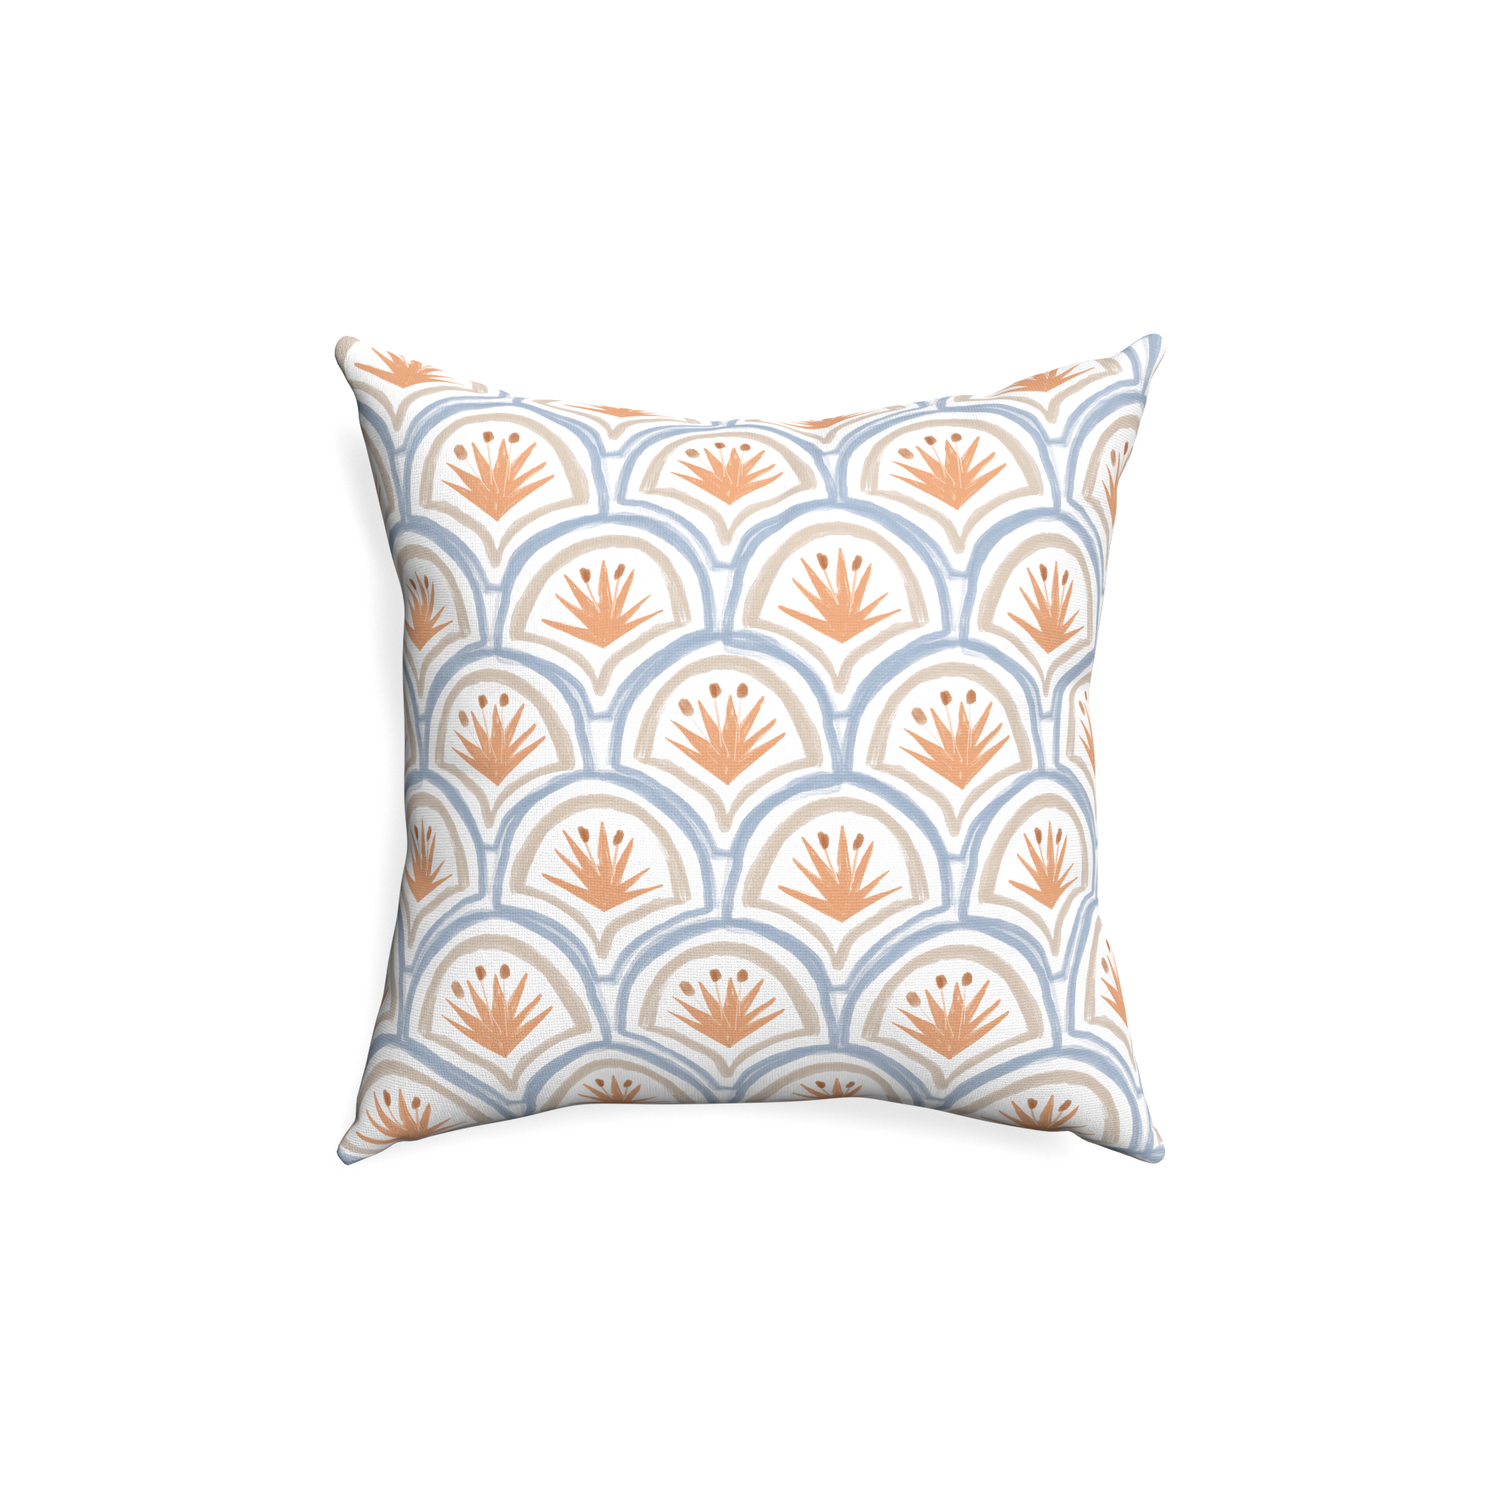 18-square thatcher apricot custom art deco palm patternpillow with none on white background